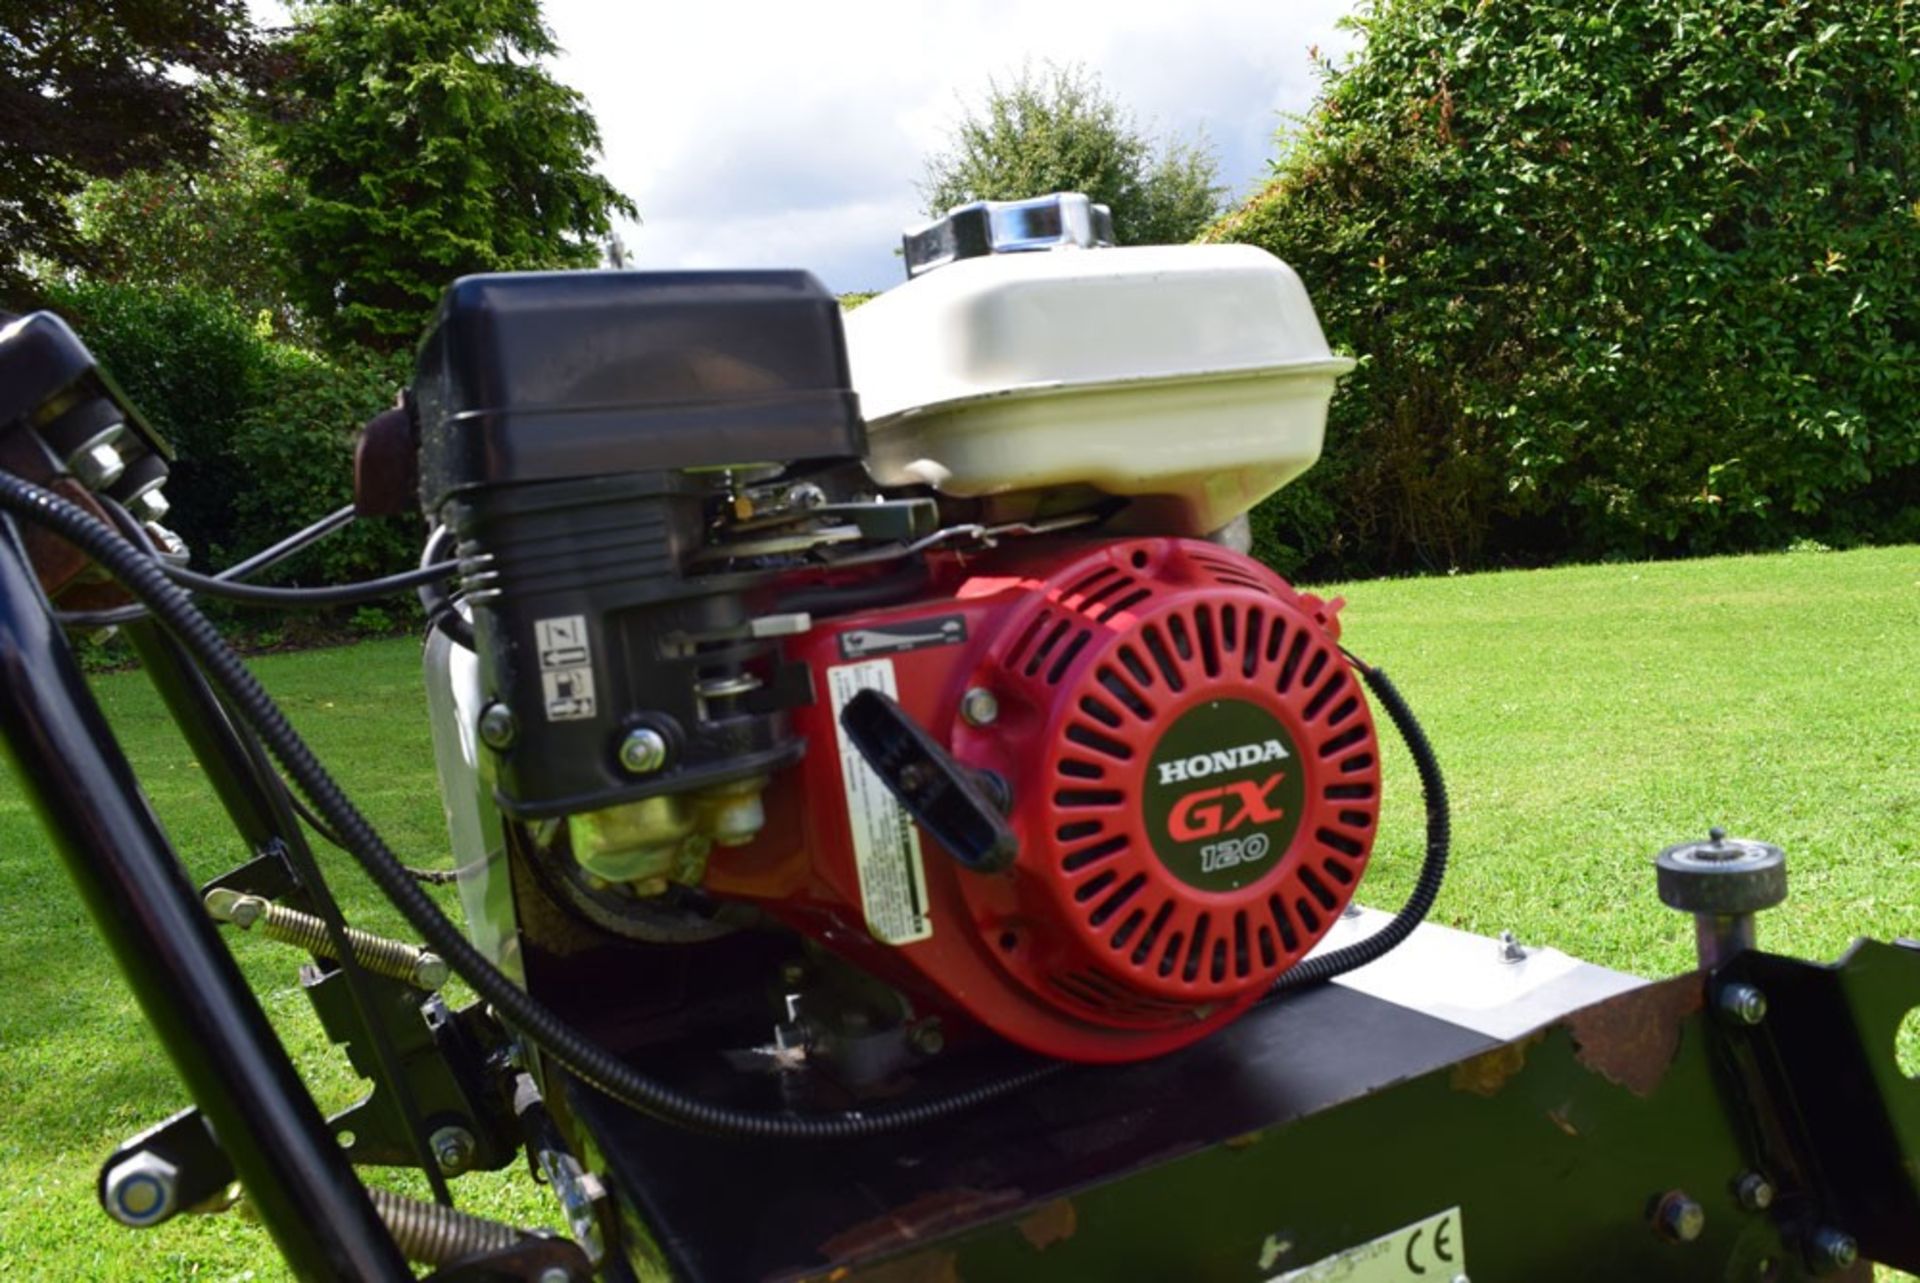 2012 Allett Shaver 20, 10 Blade Cylinder Mower With Grass Box - Image 4 of 8